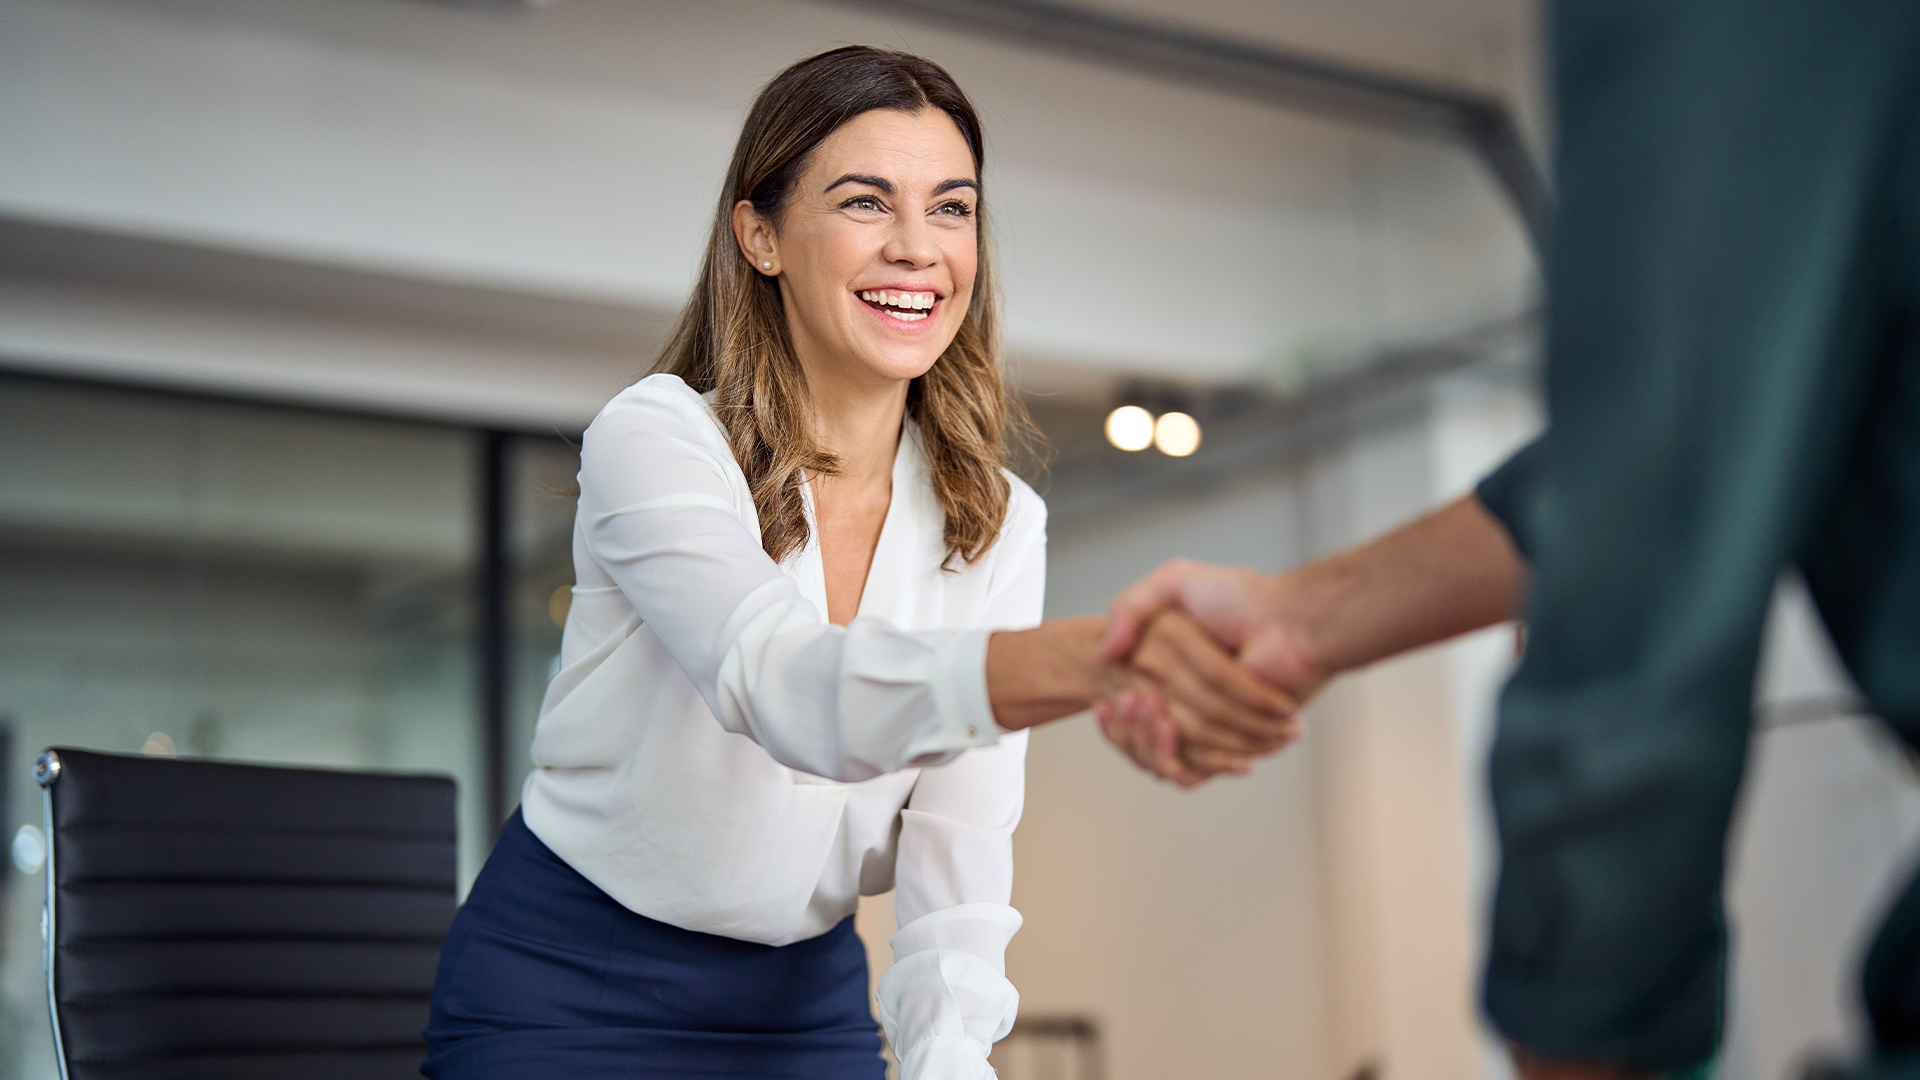 A women shaking hands with someone not in frame reflecting a client and accountant meeting.